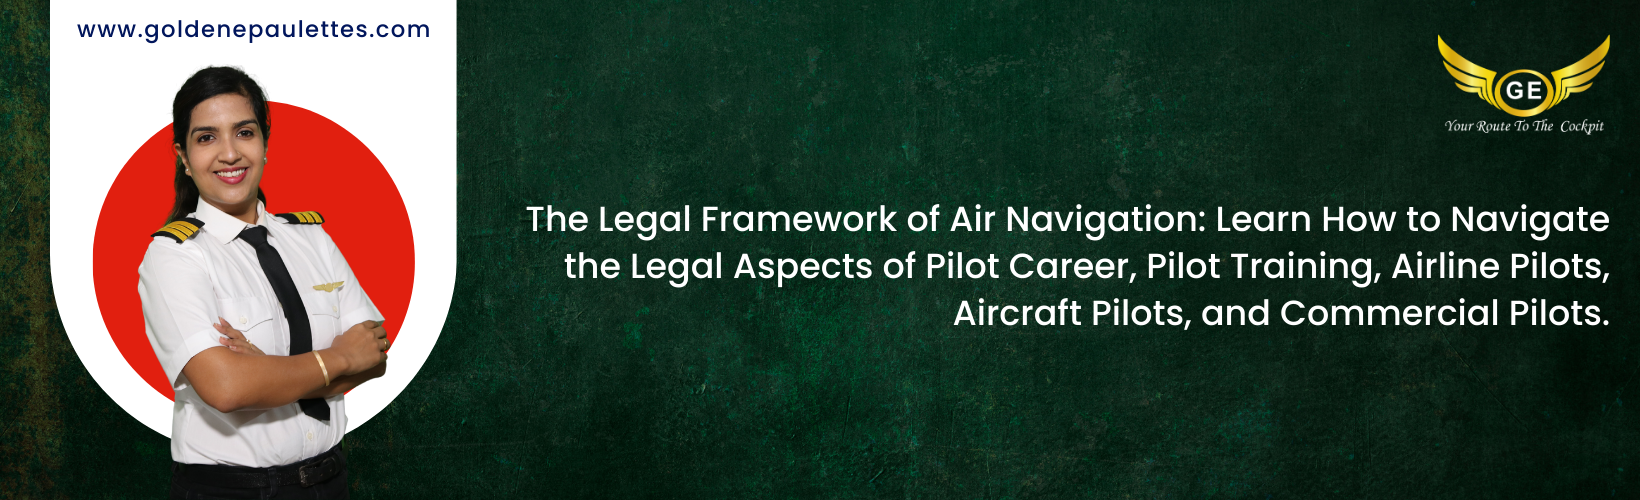 The Legal Aspects of Air Navigation